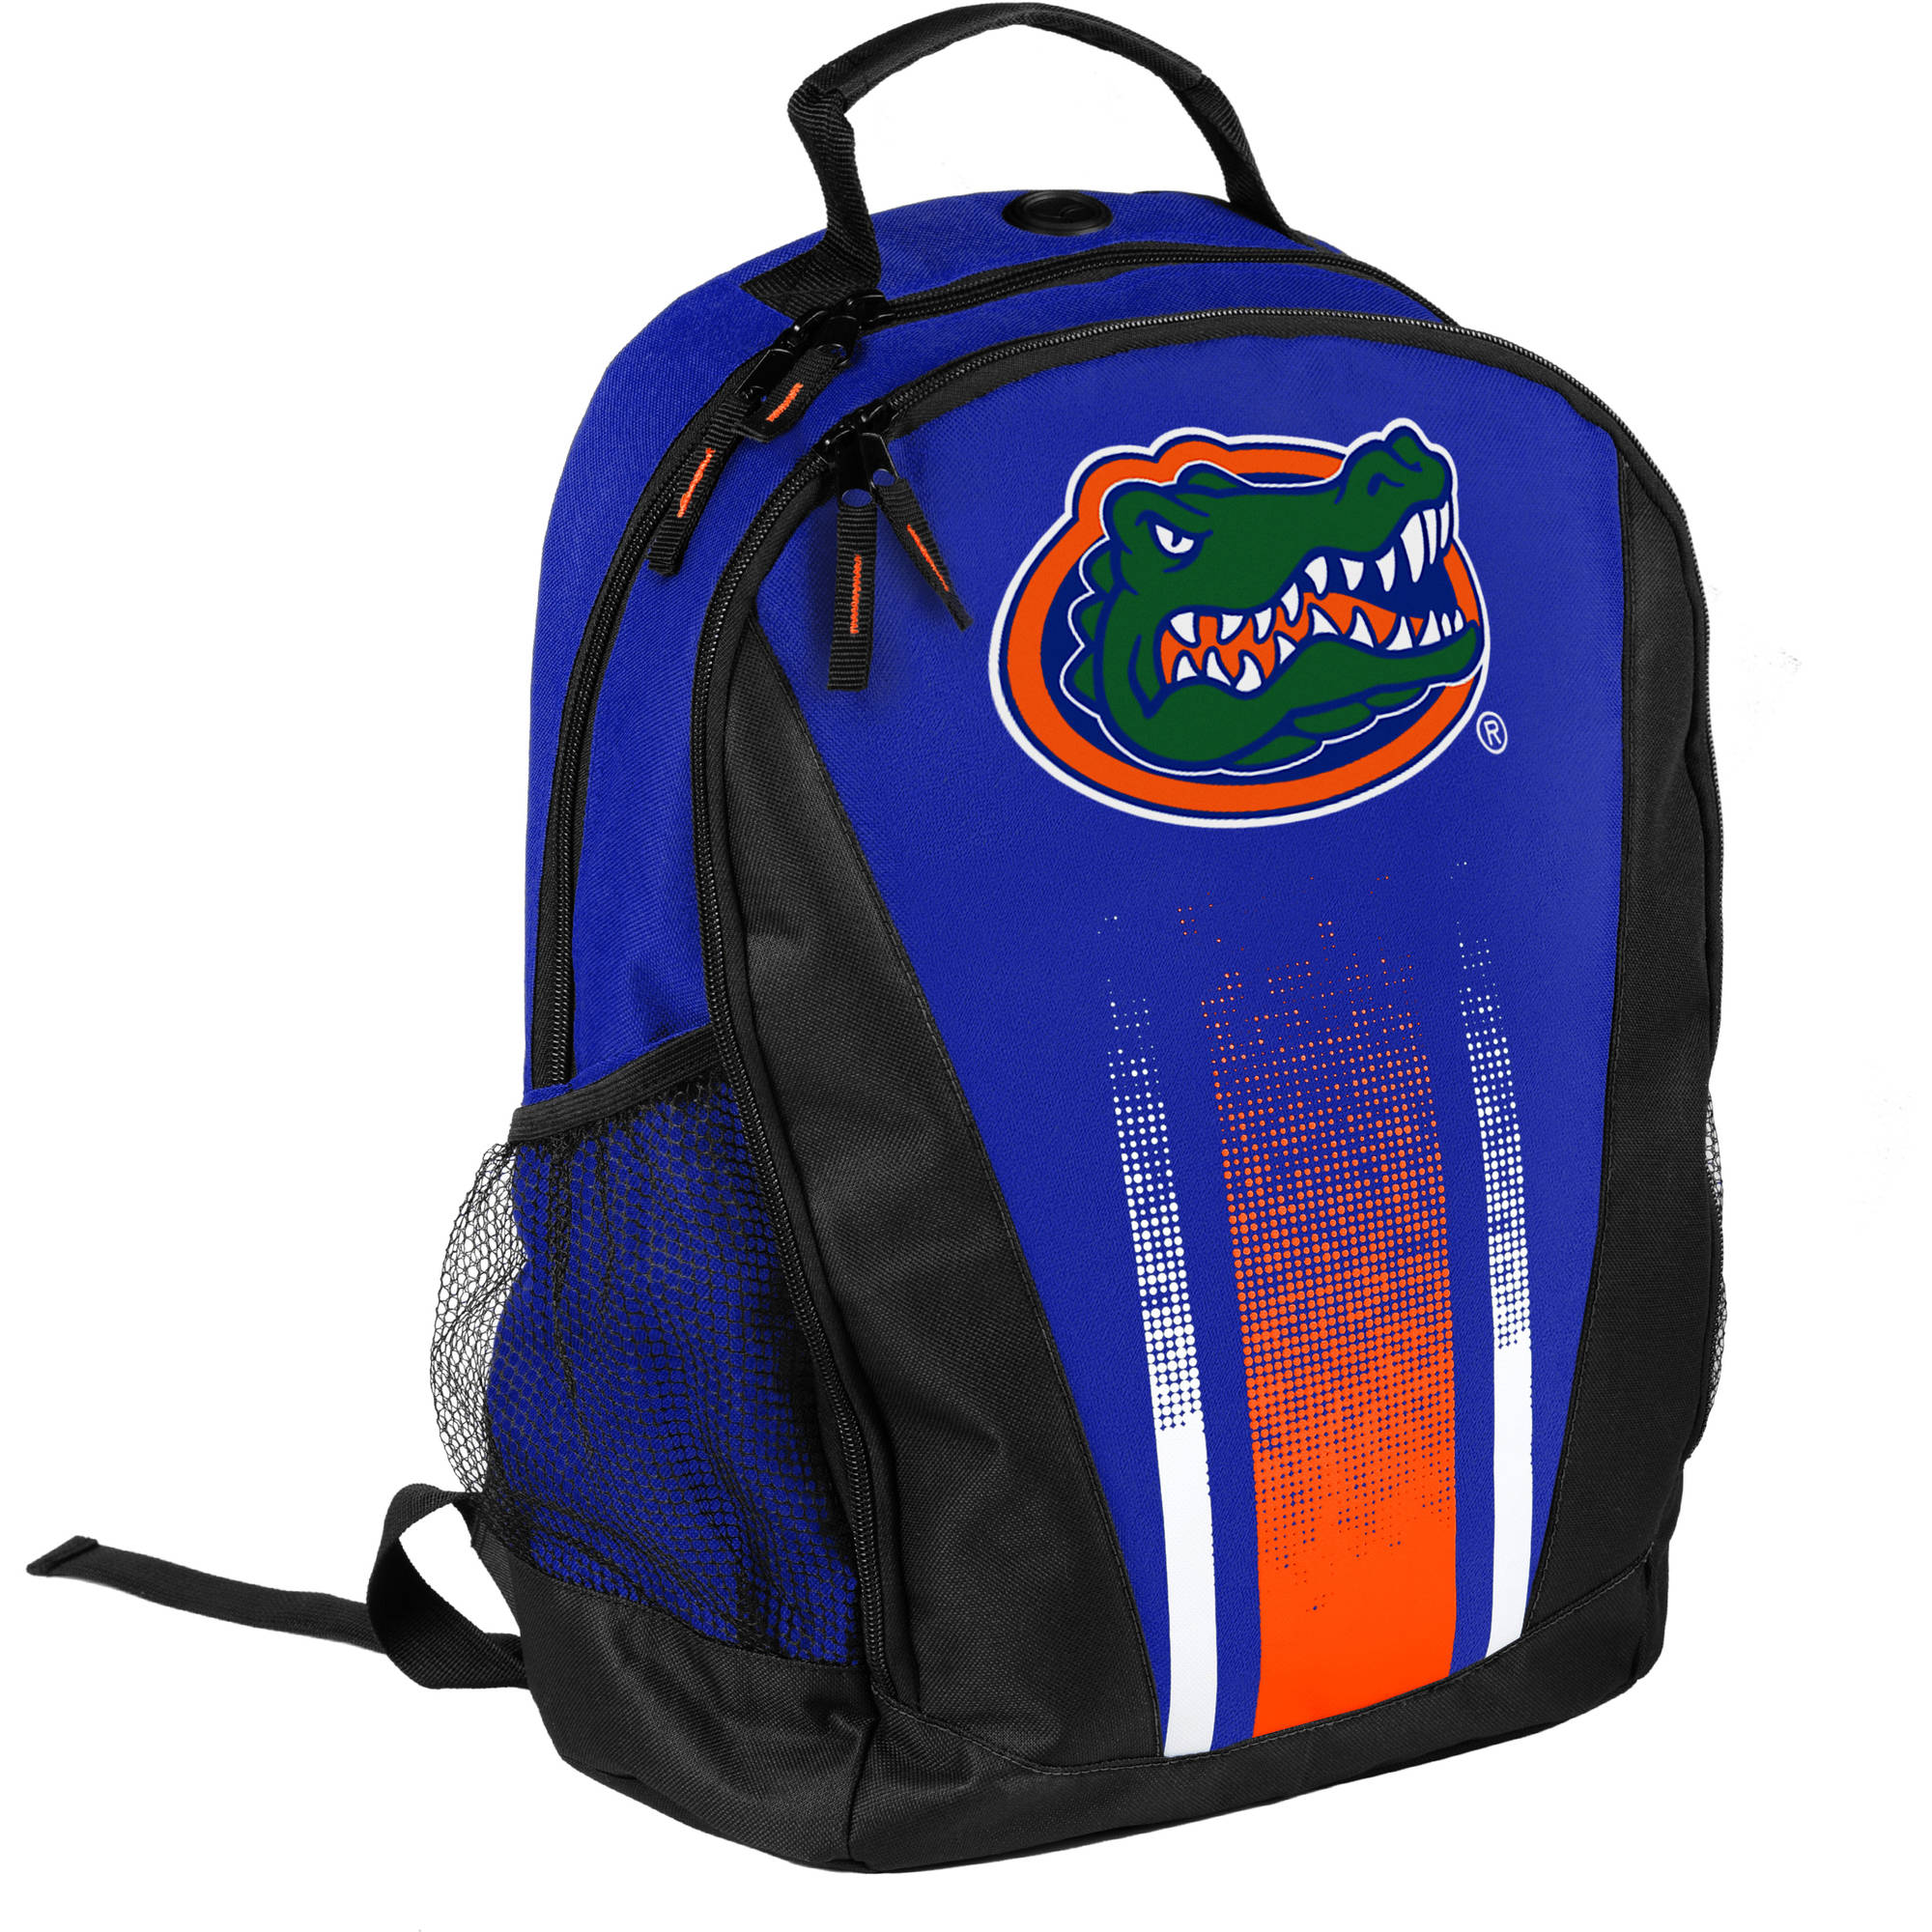 Forever Collectibles NCAA University of Florida Gators Prime Backpack - image 1 of 2